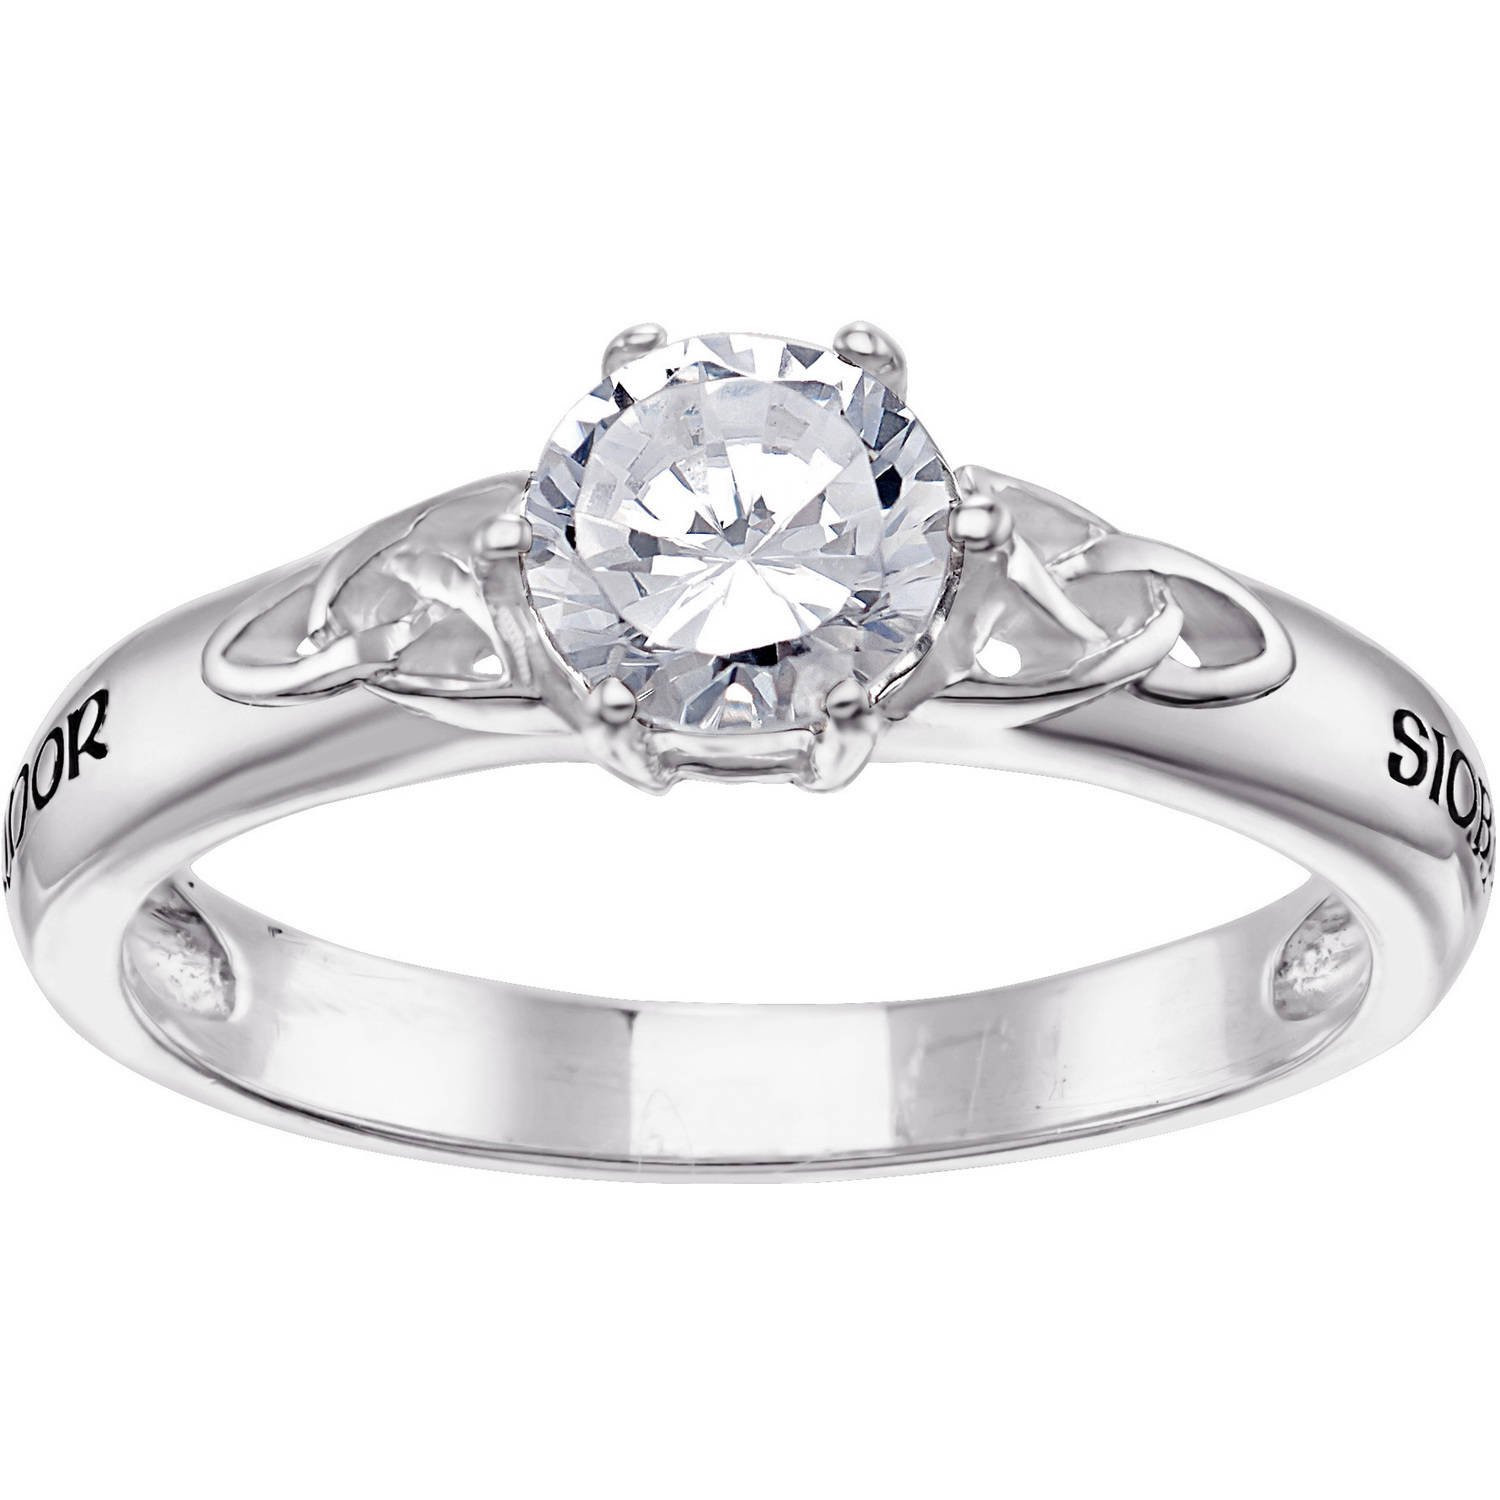 Wedding Ring Sets Walmart
 His and Hers 3 Pieces Sterling Silver and CZ Engagement